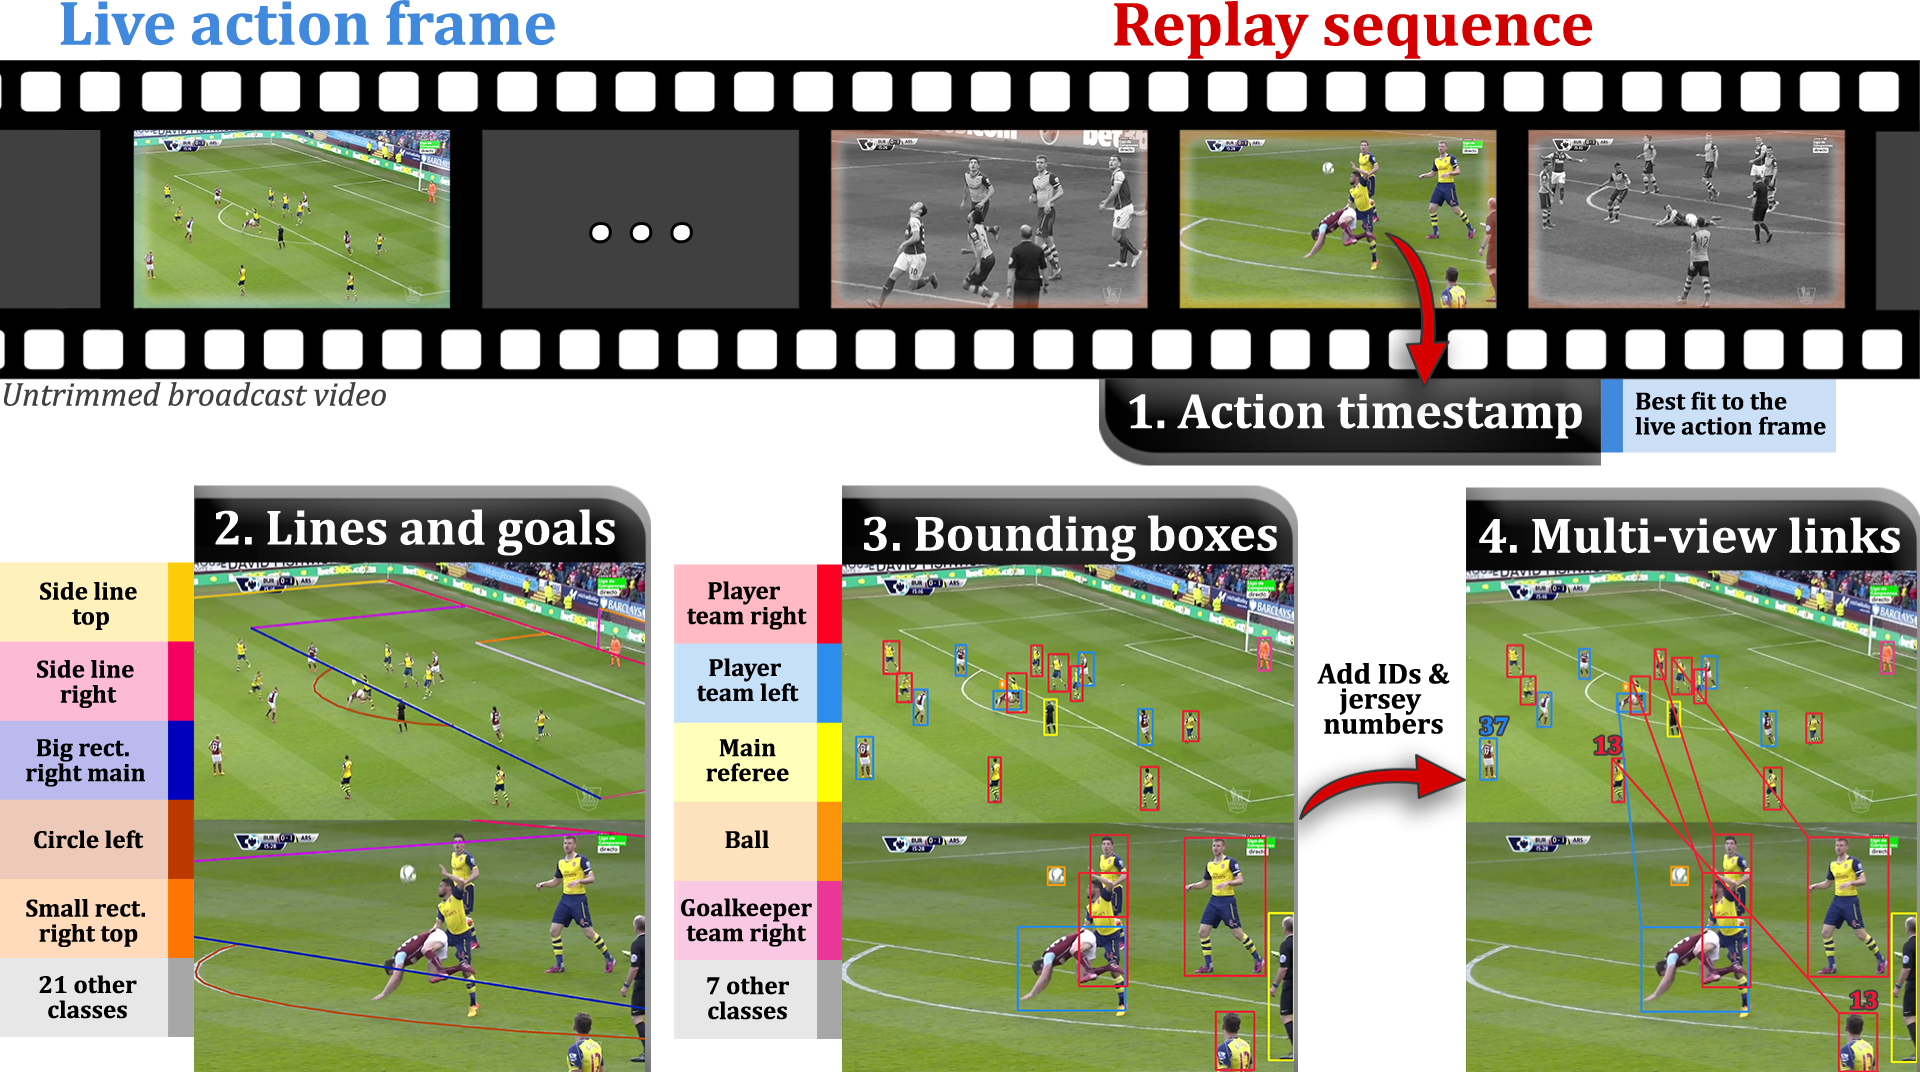 Scaling up SoccerNet with multi-view spatial localization and re-identification Scientific Data